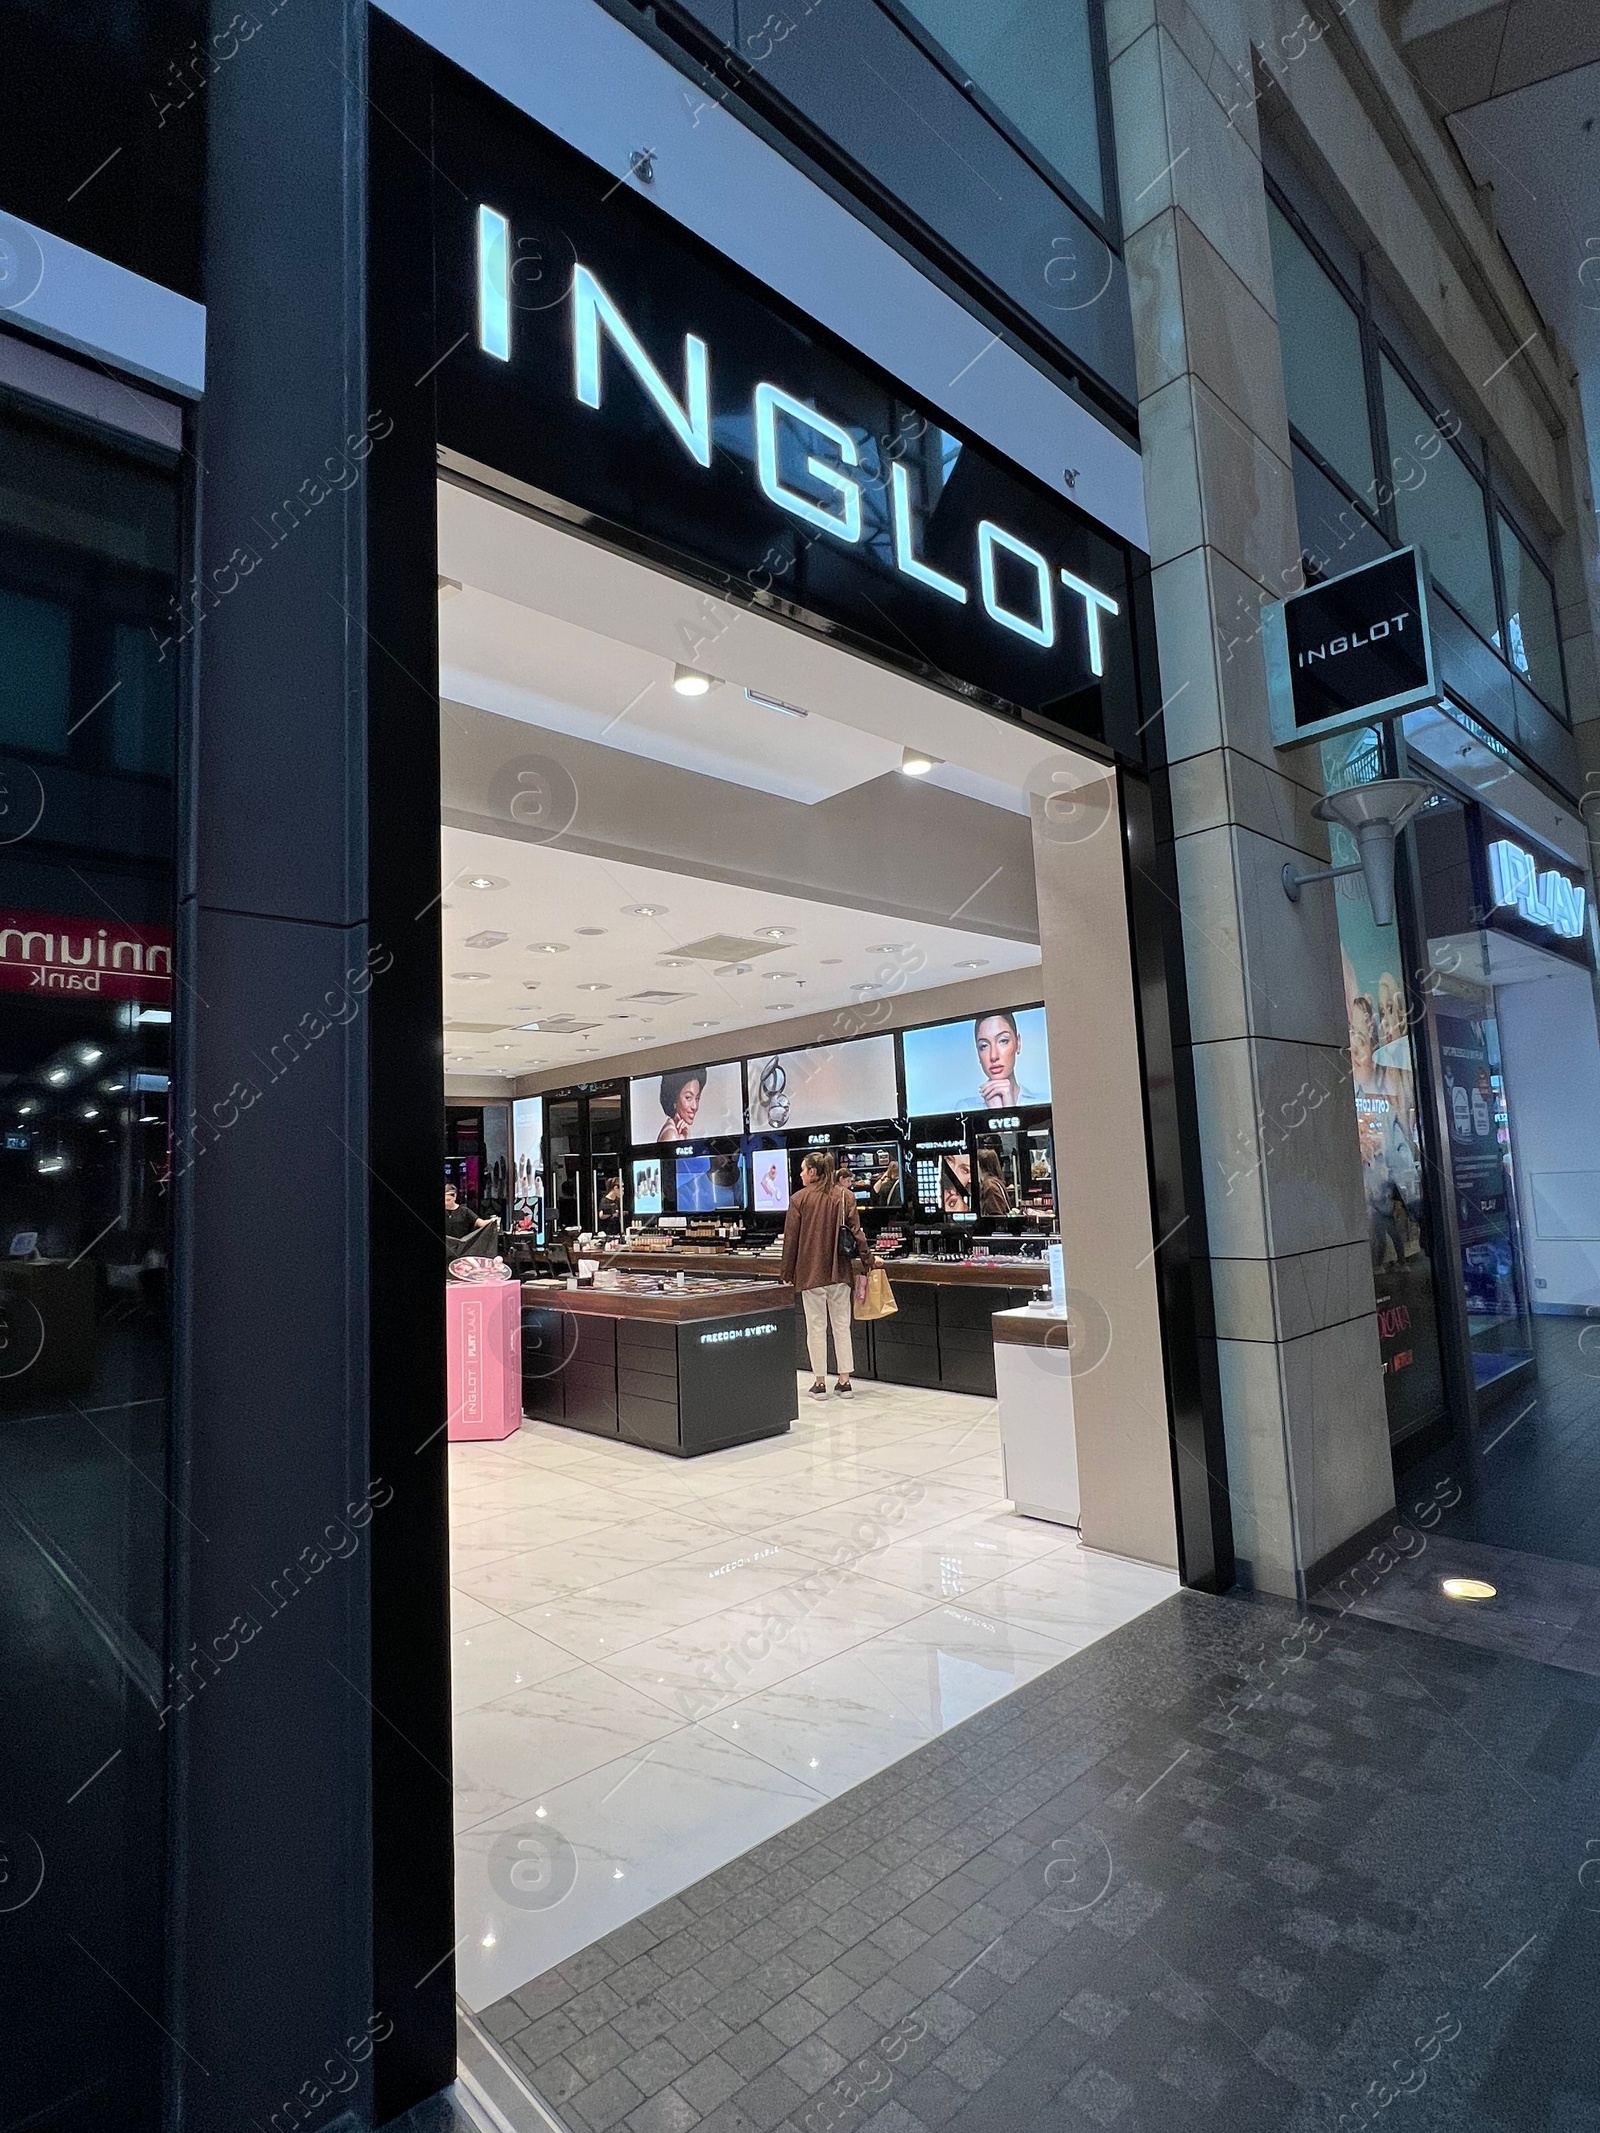 Photo of WARSAW, POLAND - JULY 17, 2022: Inglot cosmetics store in shopping mall